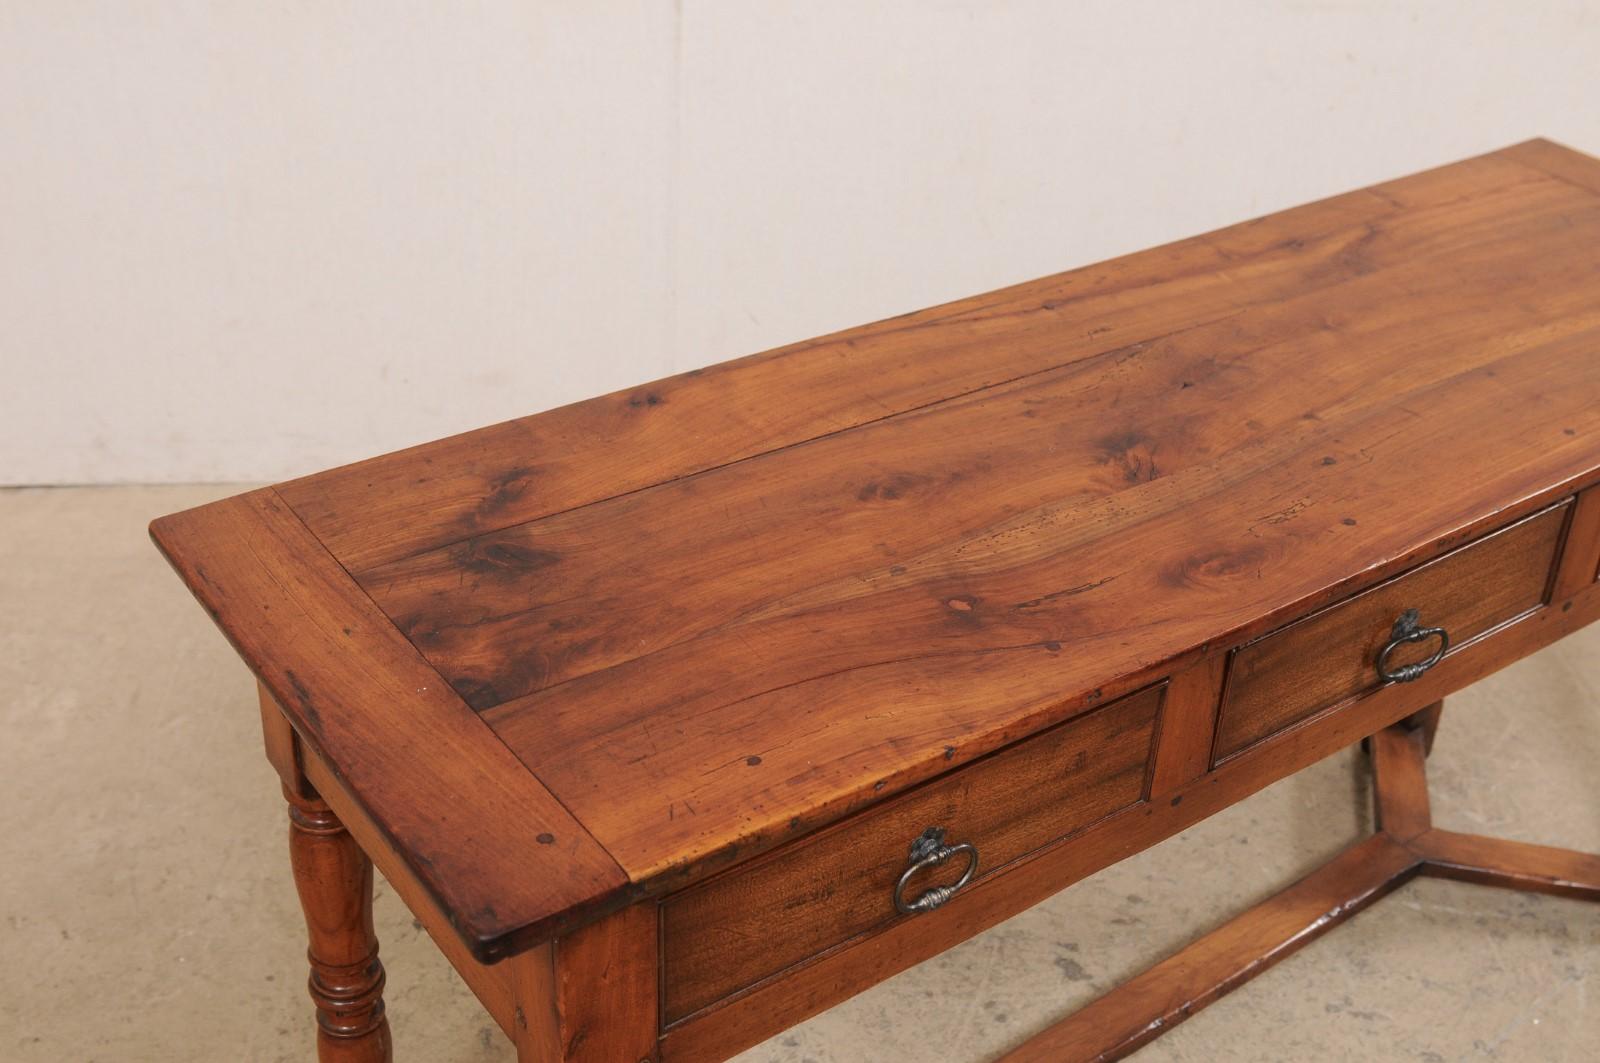 19th Century 19th C. English Wooden Sofa or Console Table w/ 3 Drawers and Nicely Turned Legs